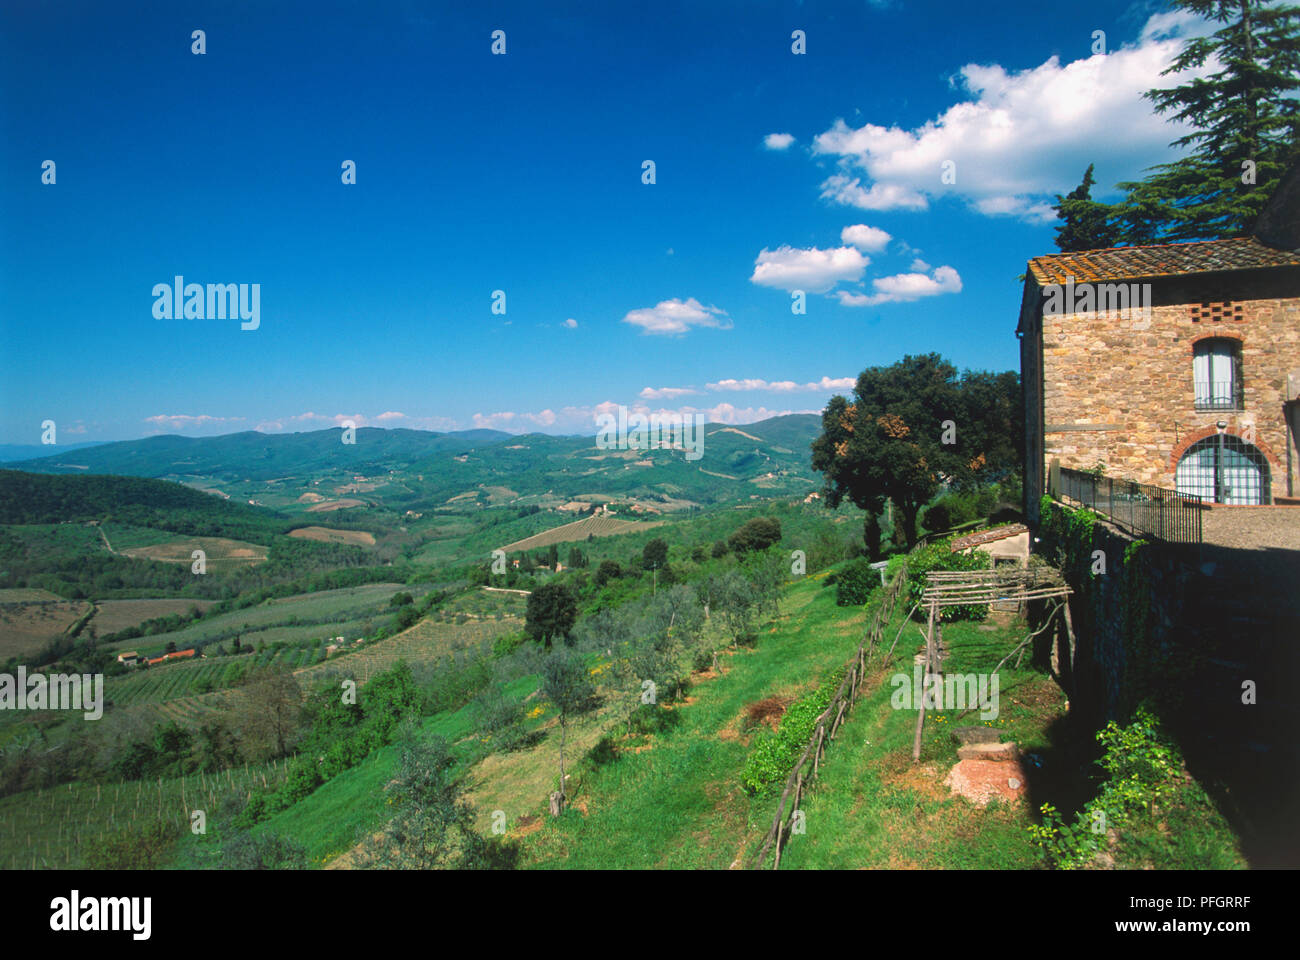 Italy, Tuscany, Chianti, Panzano, panoramic view of mountains covered in green vegetation. Stock Photo